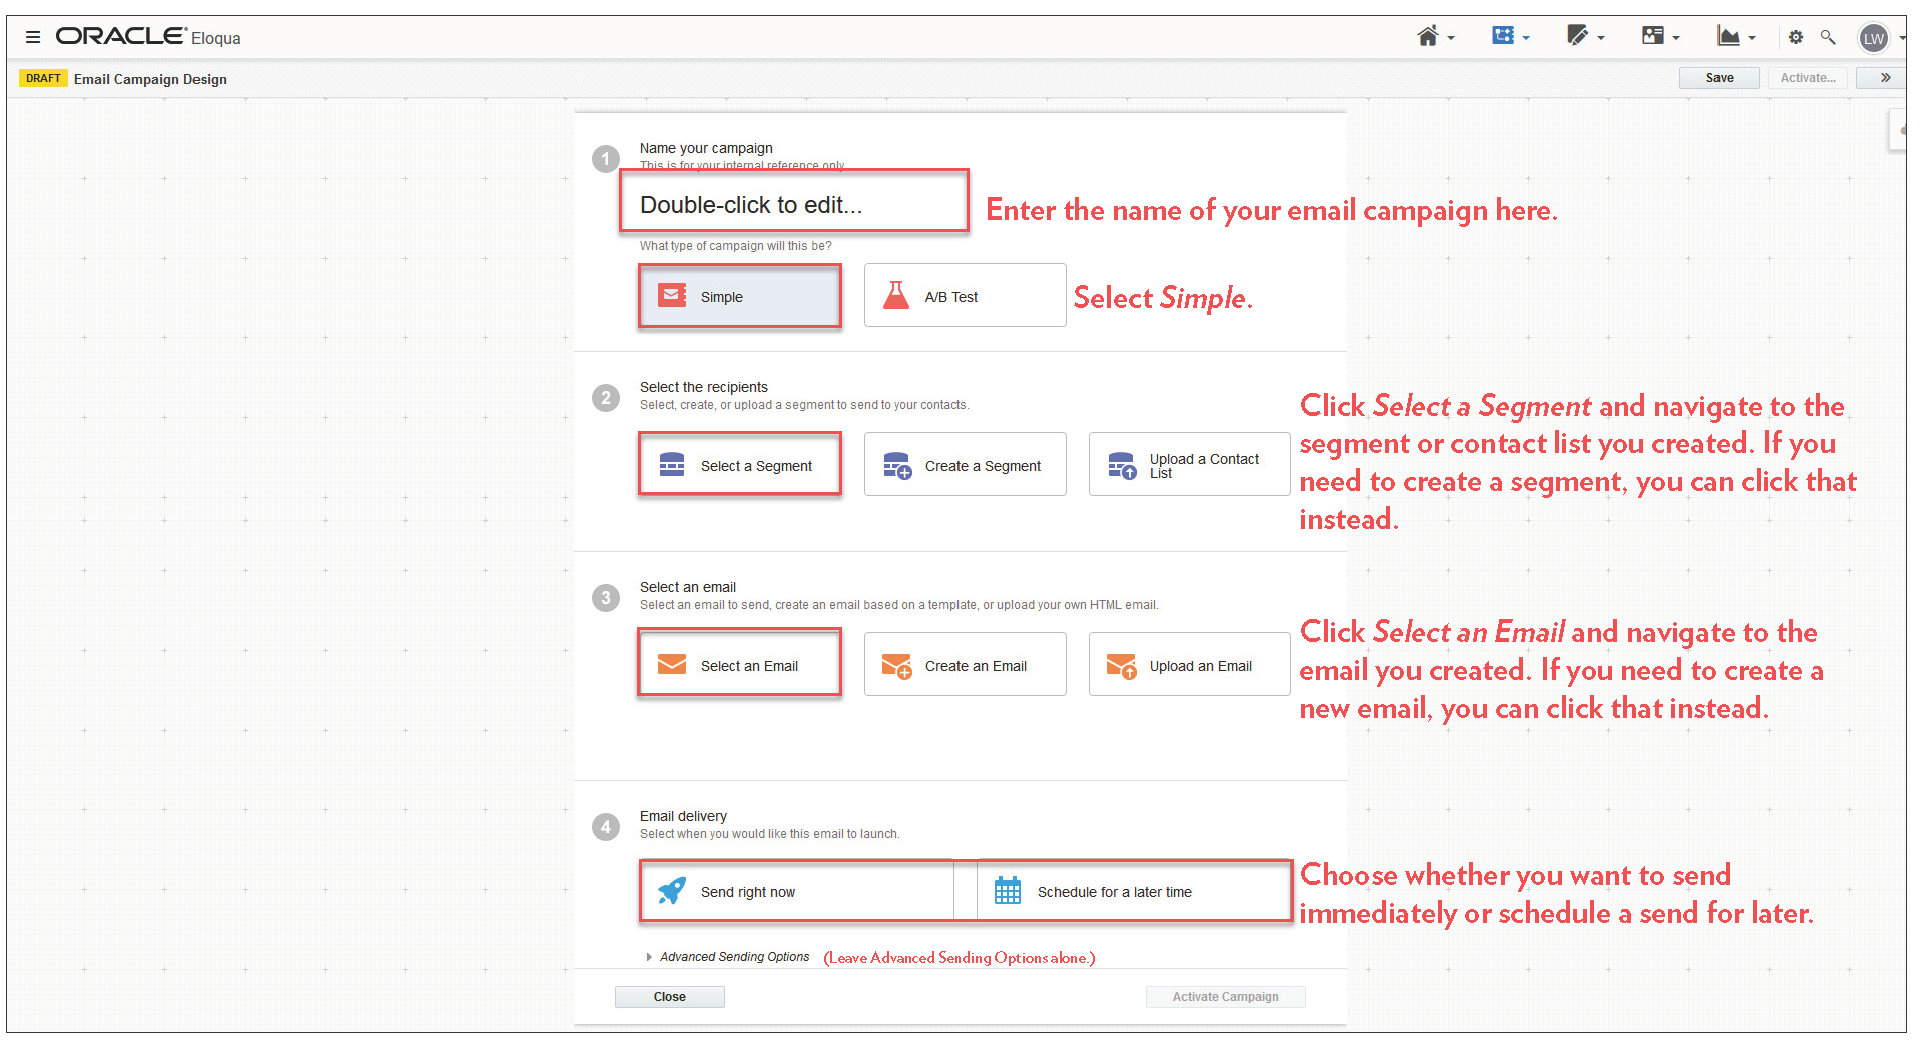 Eloqua_Campaigns-Simple_HowTo-04.png